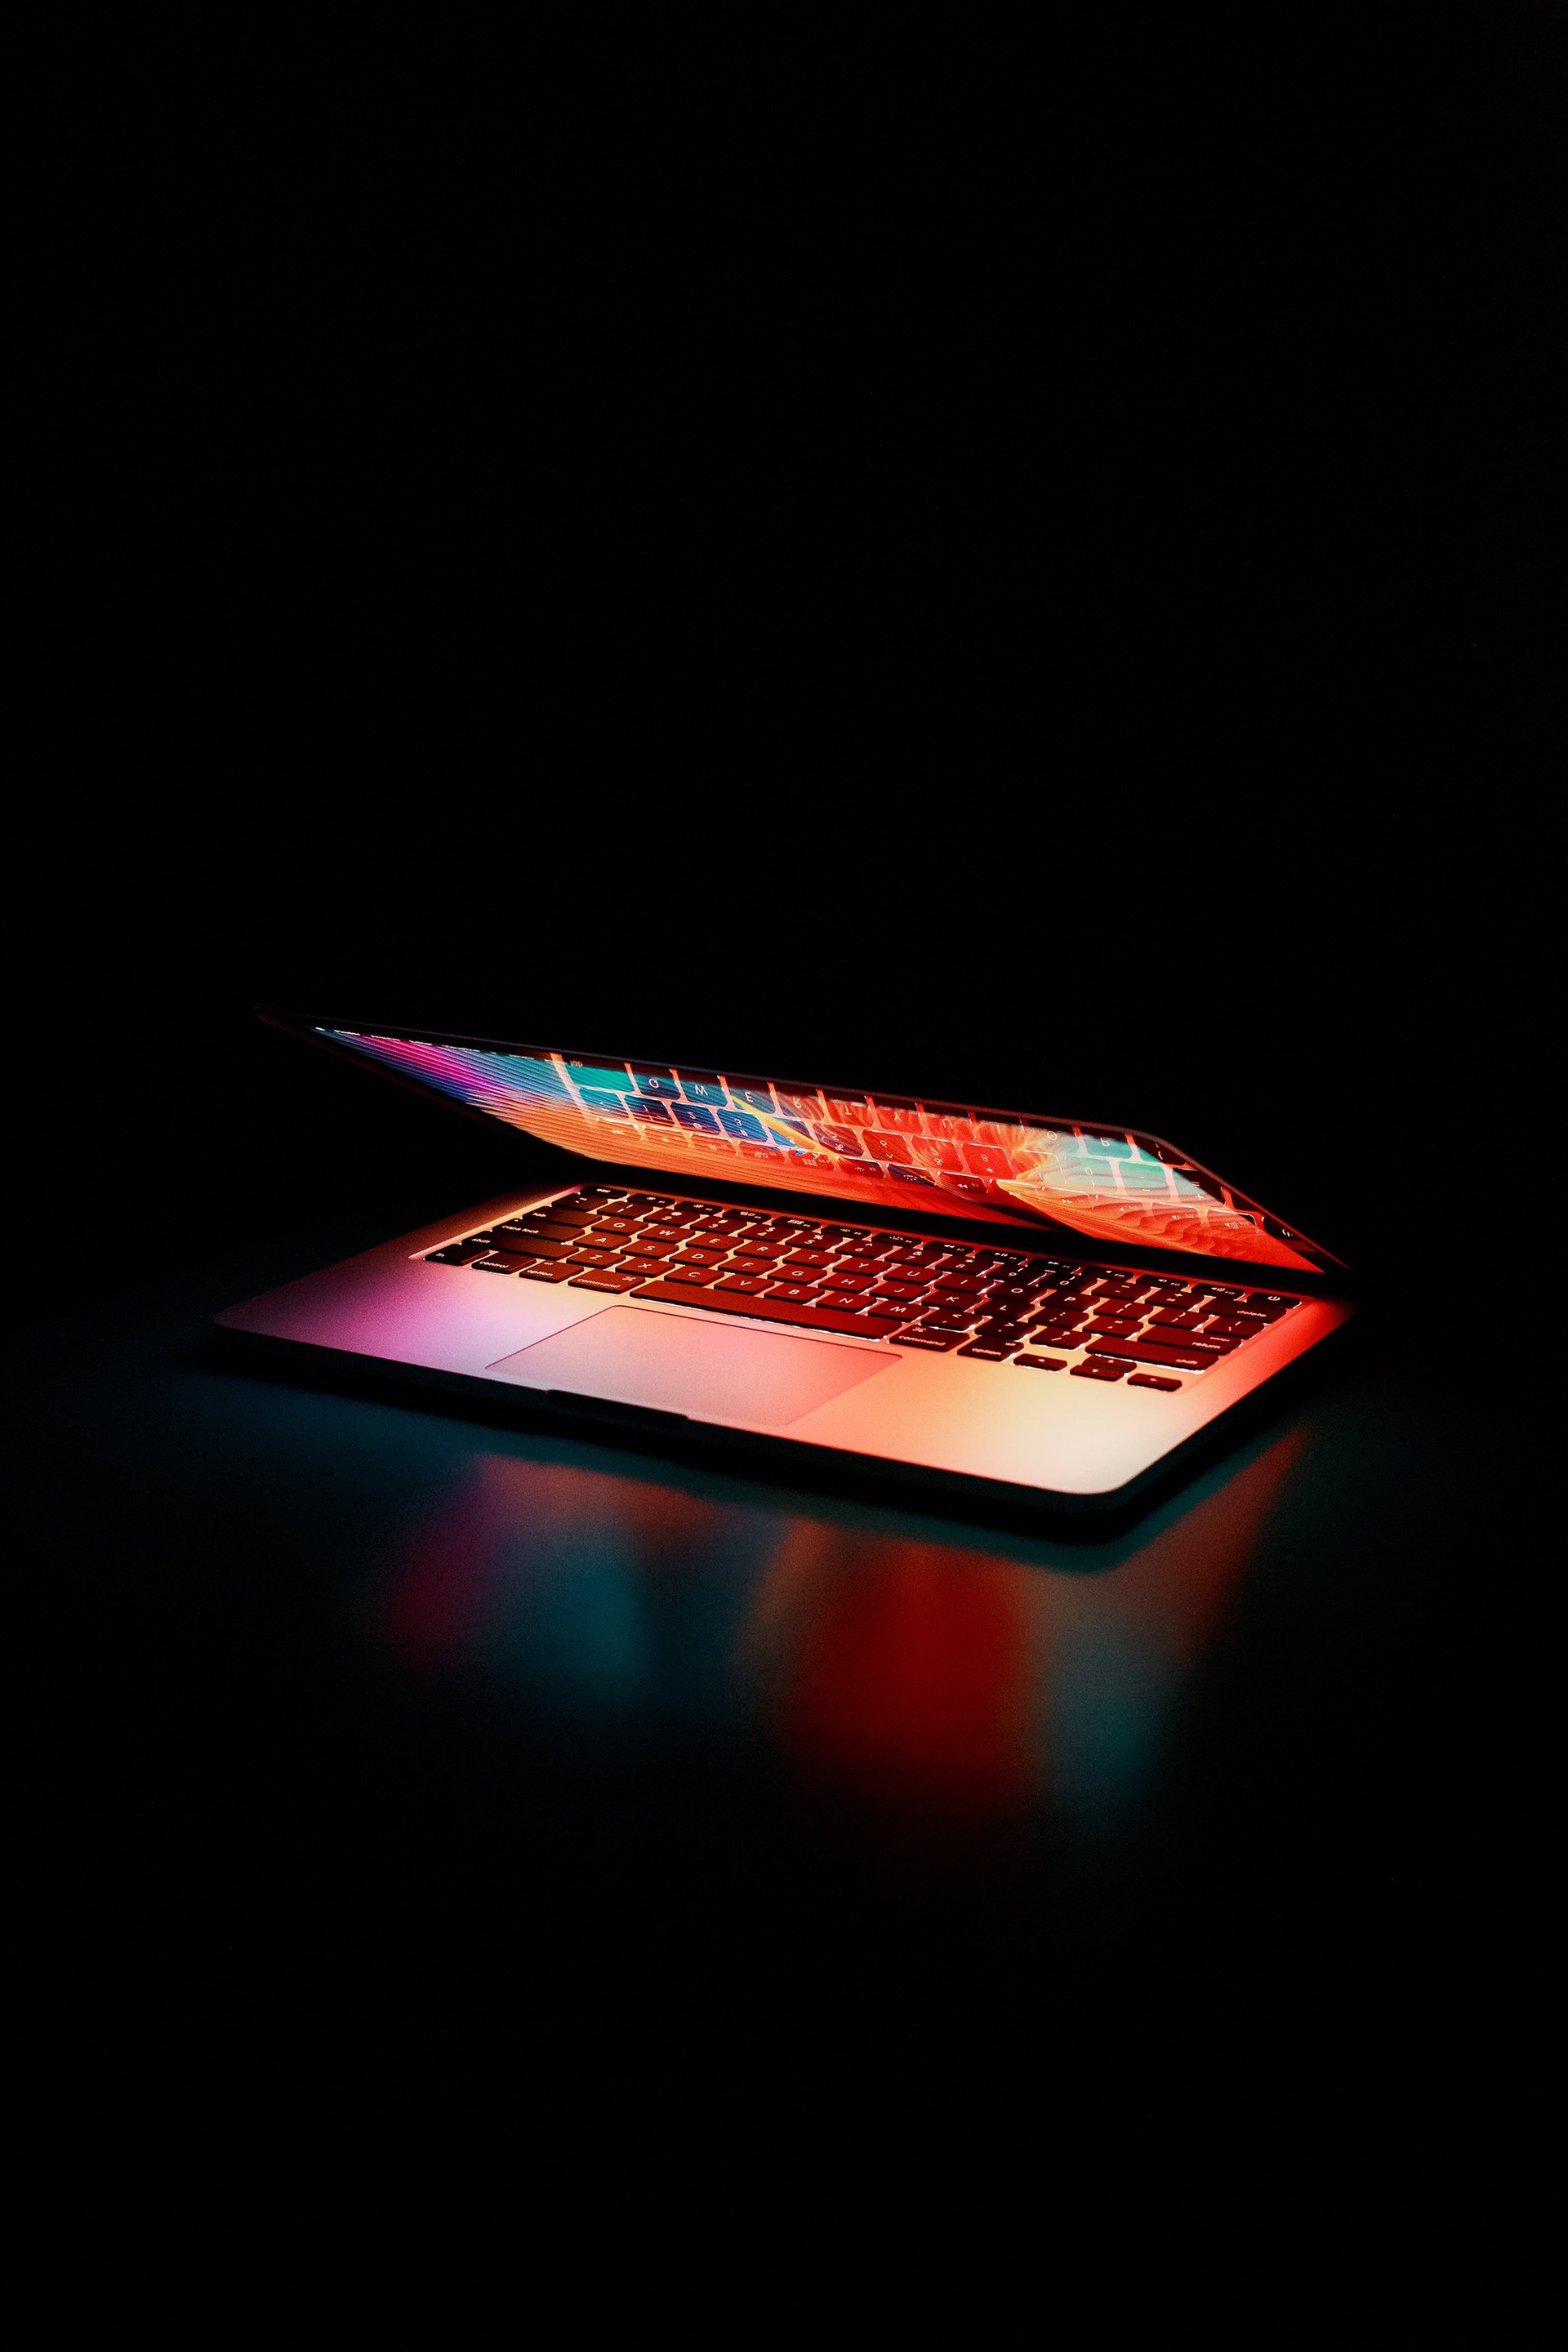 A laptop in darkness, its keyboard glowing with vibrant, multicolored lights, casting a soft, colorful reflection on the surface.